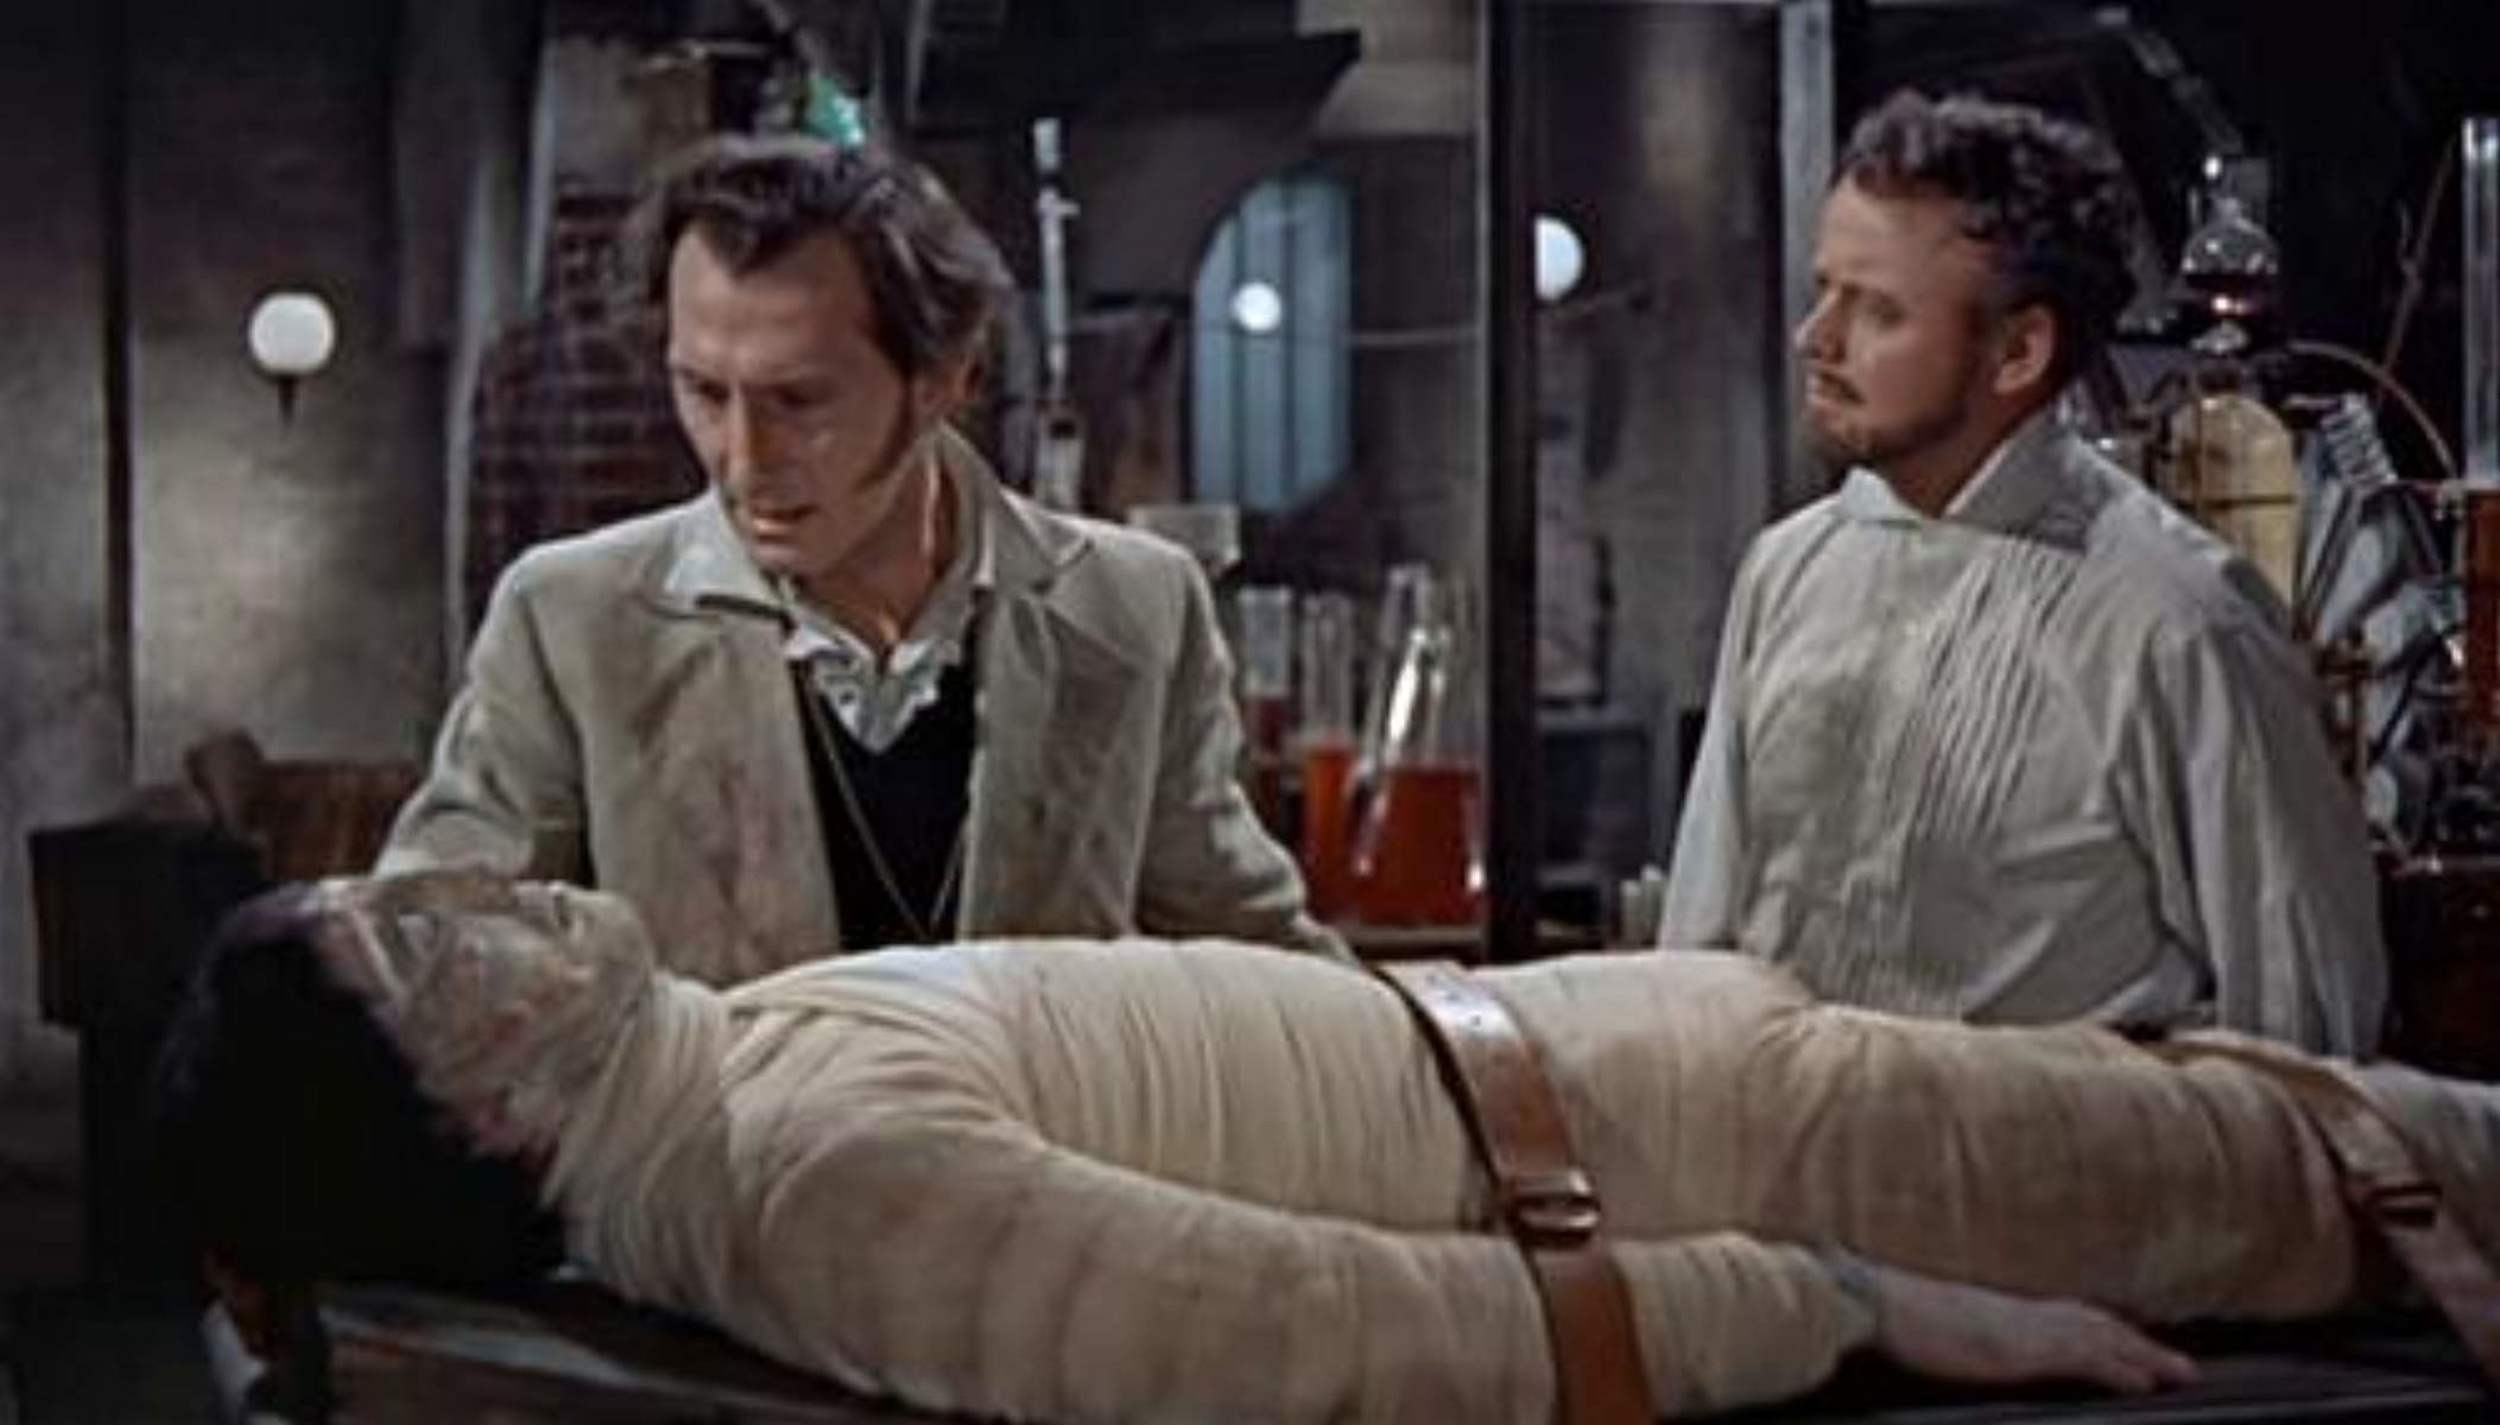 <p>Terence Fisher’s “Curse of Frankenstein” established the Hammer Horror house style in 1957 with its florid color scheme, generous (for the time) gore and the one-two punch of Peter Cushing and Christopher Lee as, respectively, Victor Frankenstein and his monster. Six sequels ensued — most with Cushing hamming it up in his inimitable fashion as the Baron, while Lee put in his work as Hammer’s Dracula — and they vary in quality from quite good (“The Revenge of Frankenstein” and “Frankenstein and the Monster from Hell”) to regrettably awful (the Freddie Francis-directed “The Evil of Frankenstein”).</p><p>You may also like: <a href='https://www.yardbarker.com/entertainment/articles/which_films_turn_50_in_2023_101523/s1__38186801'>Which films turn 50 in 2023?</a></p>